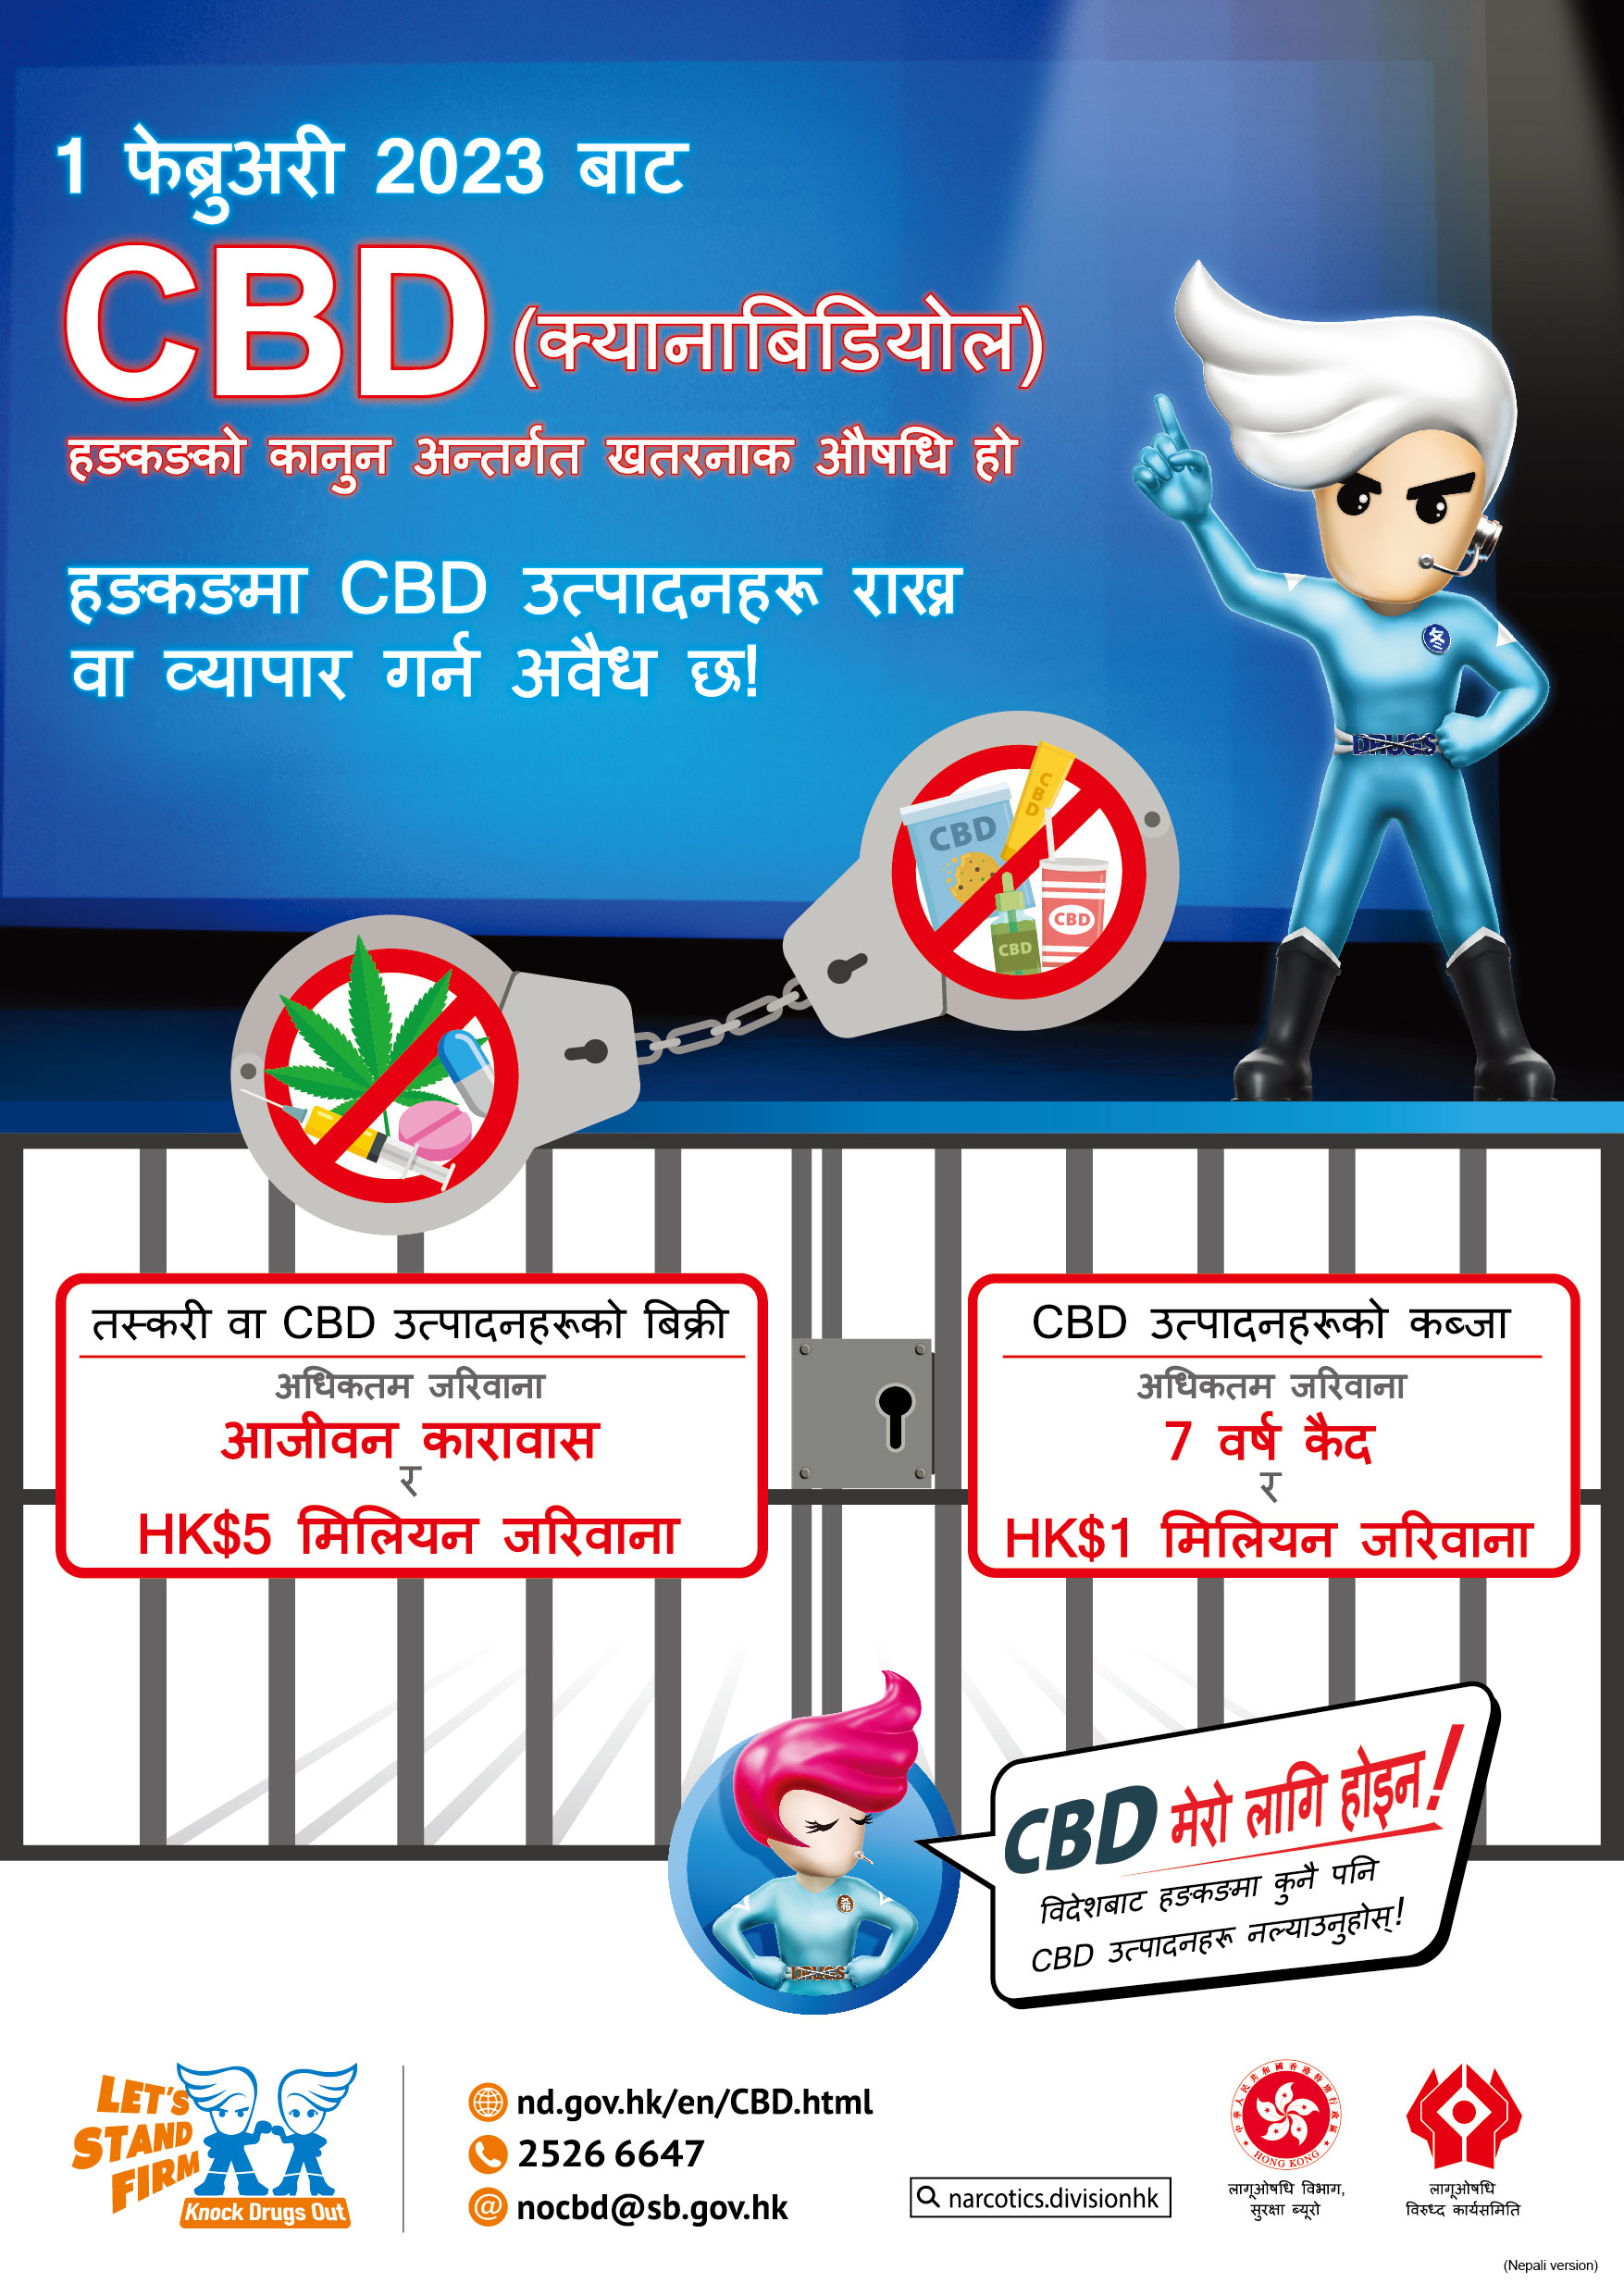 Anti-drug poster “CBD, Not for me! (Commencement of Law)” – Nepali version